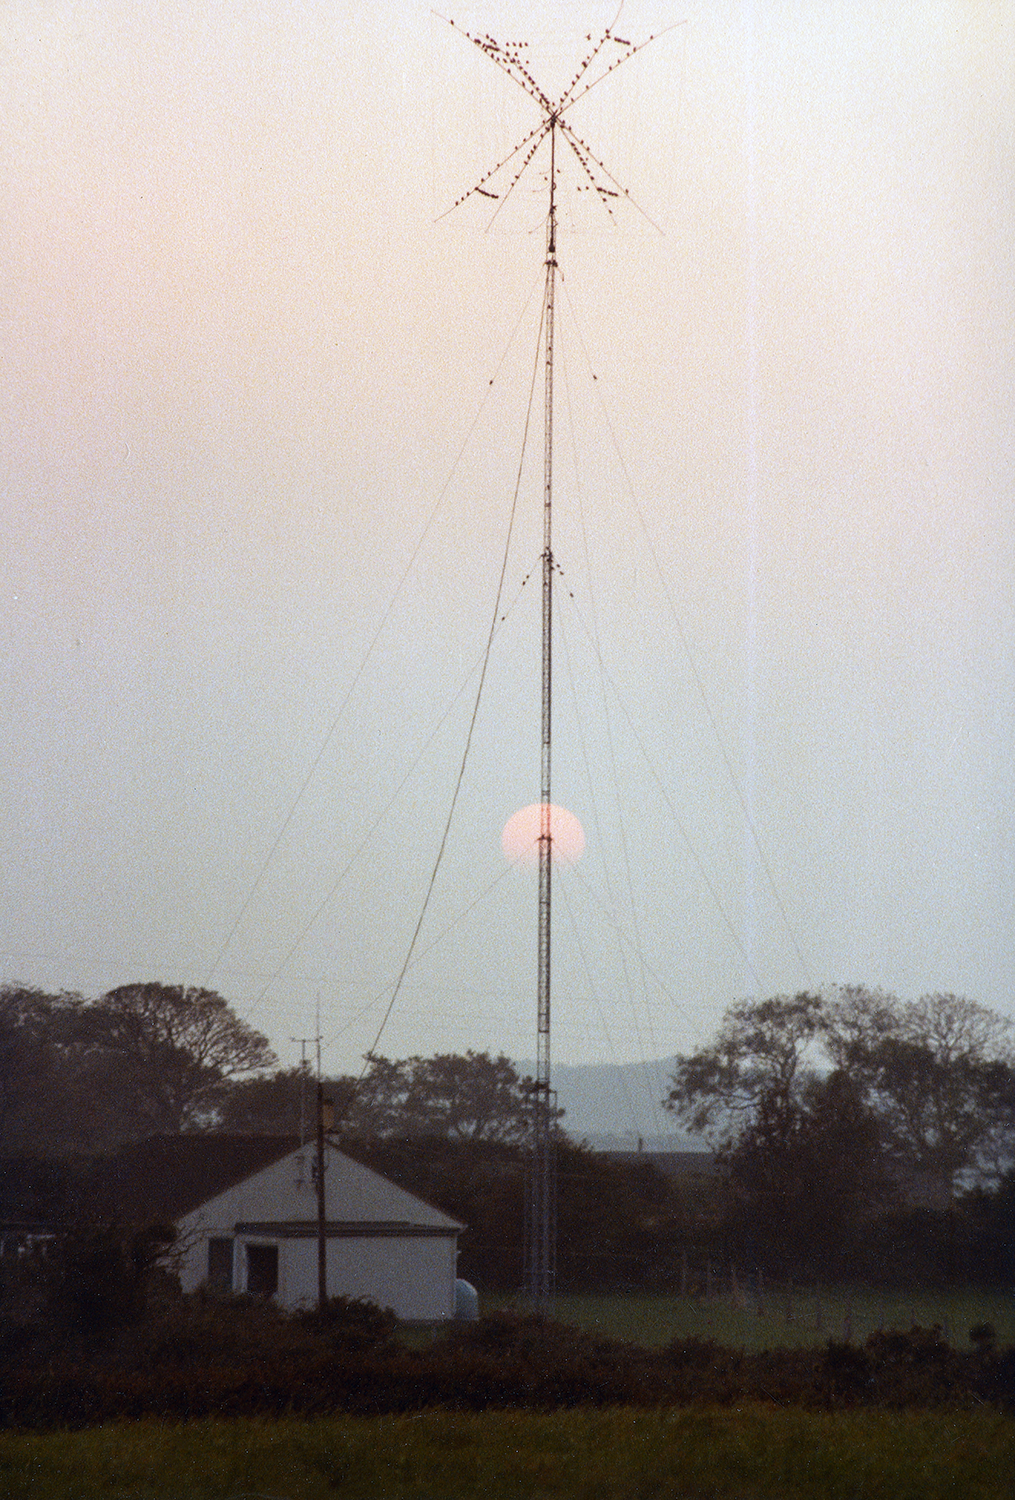 It looks like the homemade Cubical Quad Antenna was a firm favourite with the local birds.